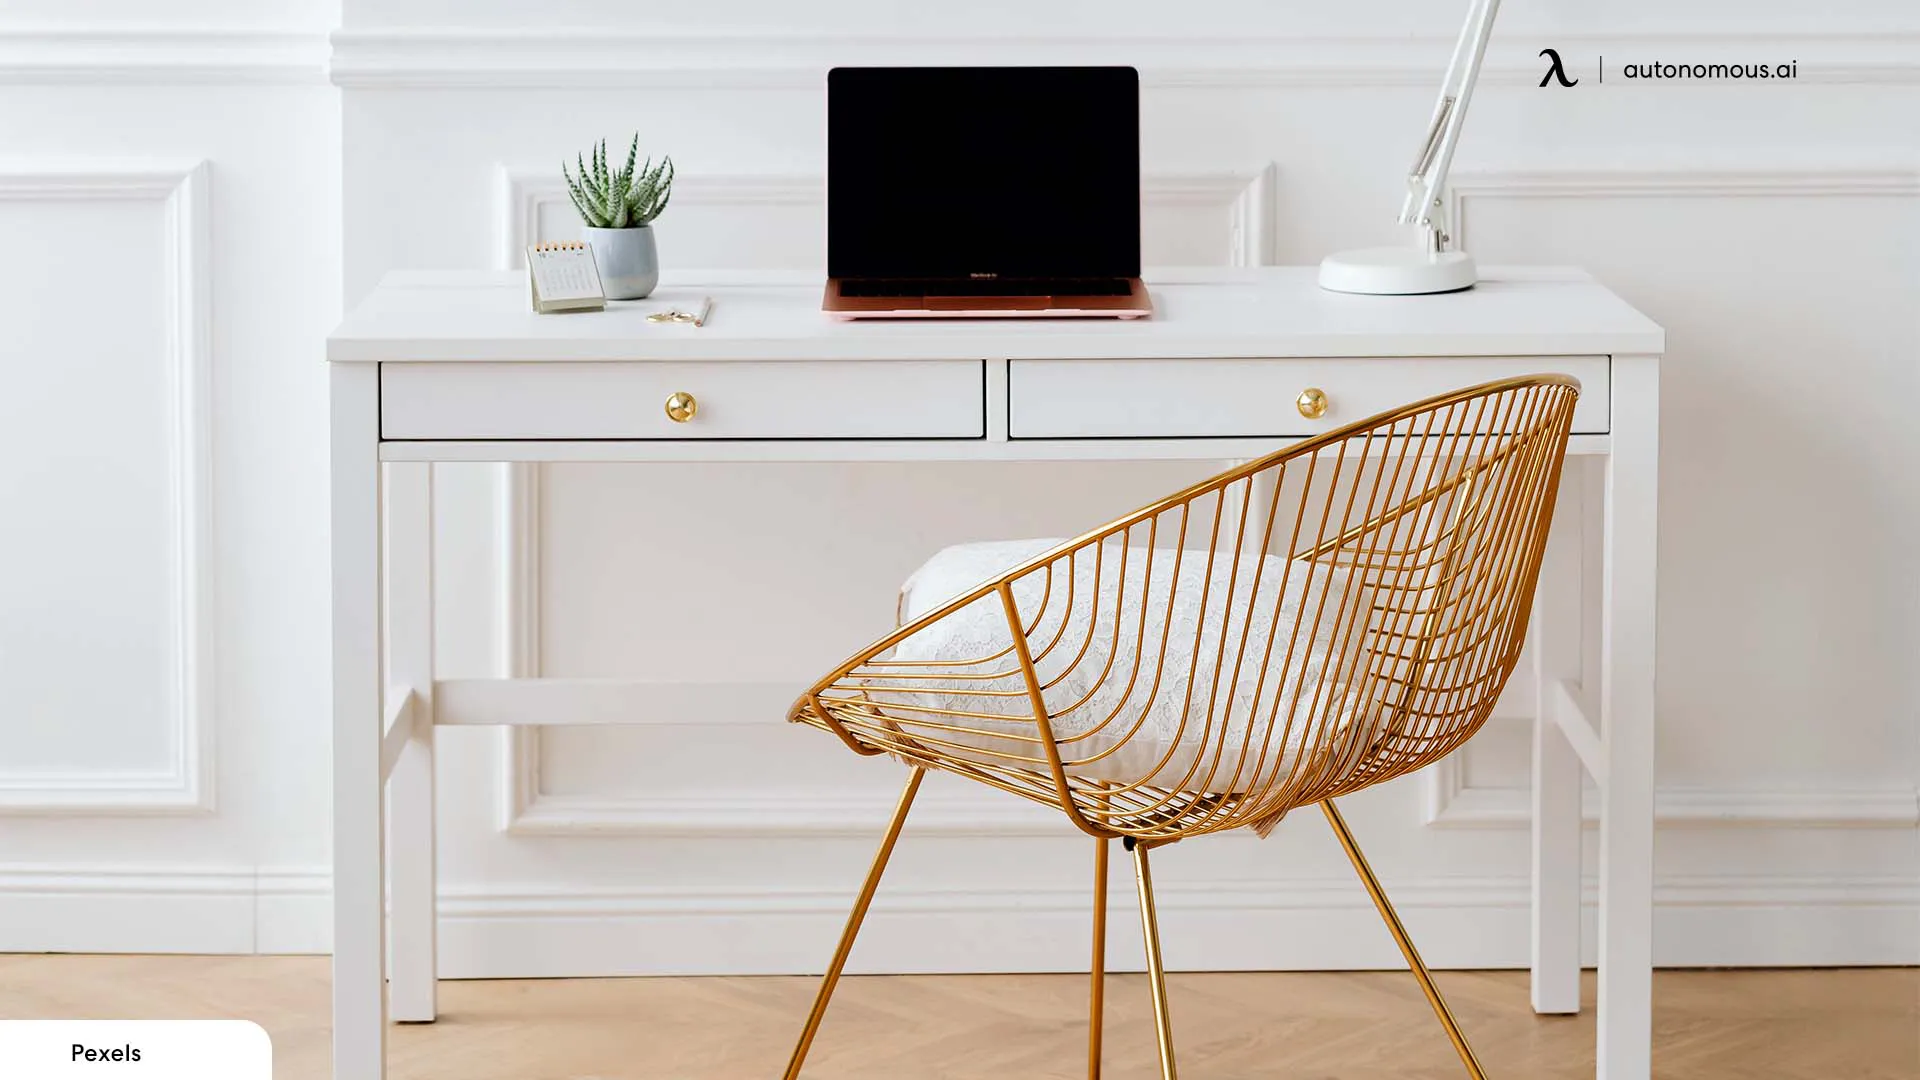 36 Affordable Home Office Decoration Ideas to Give You Chance to Do Some  Business at Home - Matchness.com | Home office decor, Home office design, Desk  decor